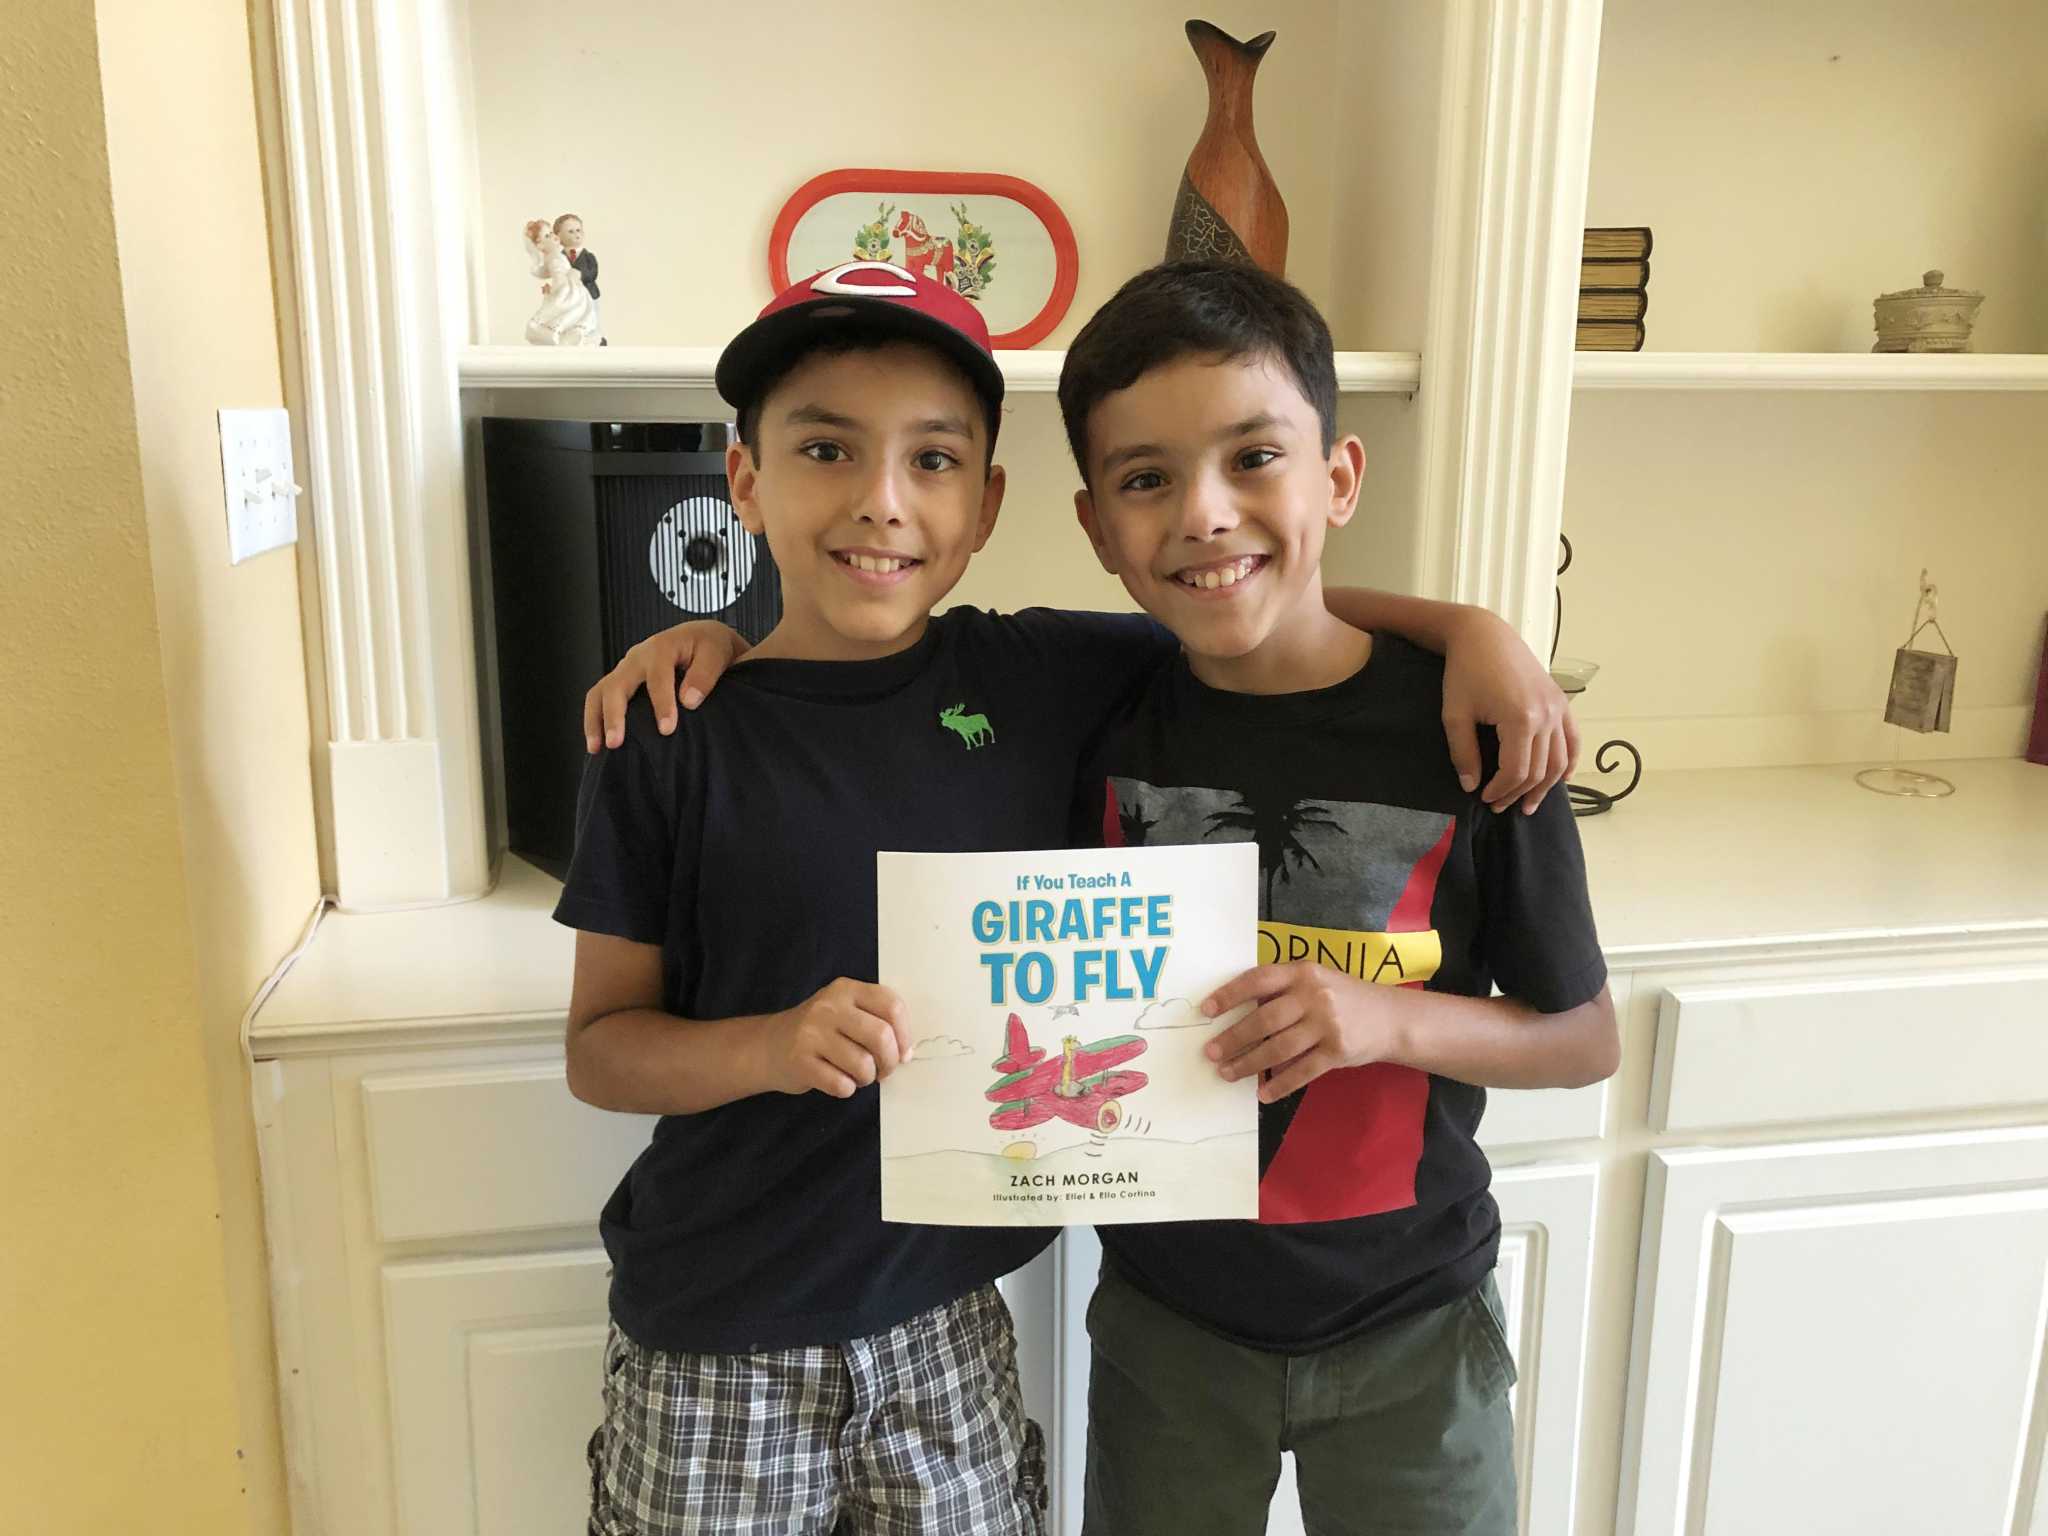 Twinning: 11-year old brothers from Huffman illustrate published